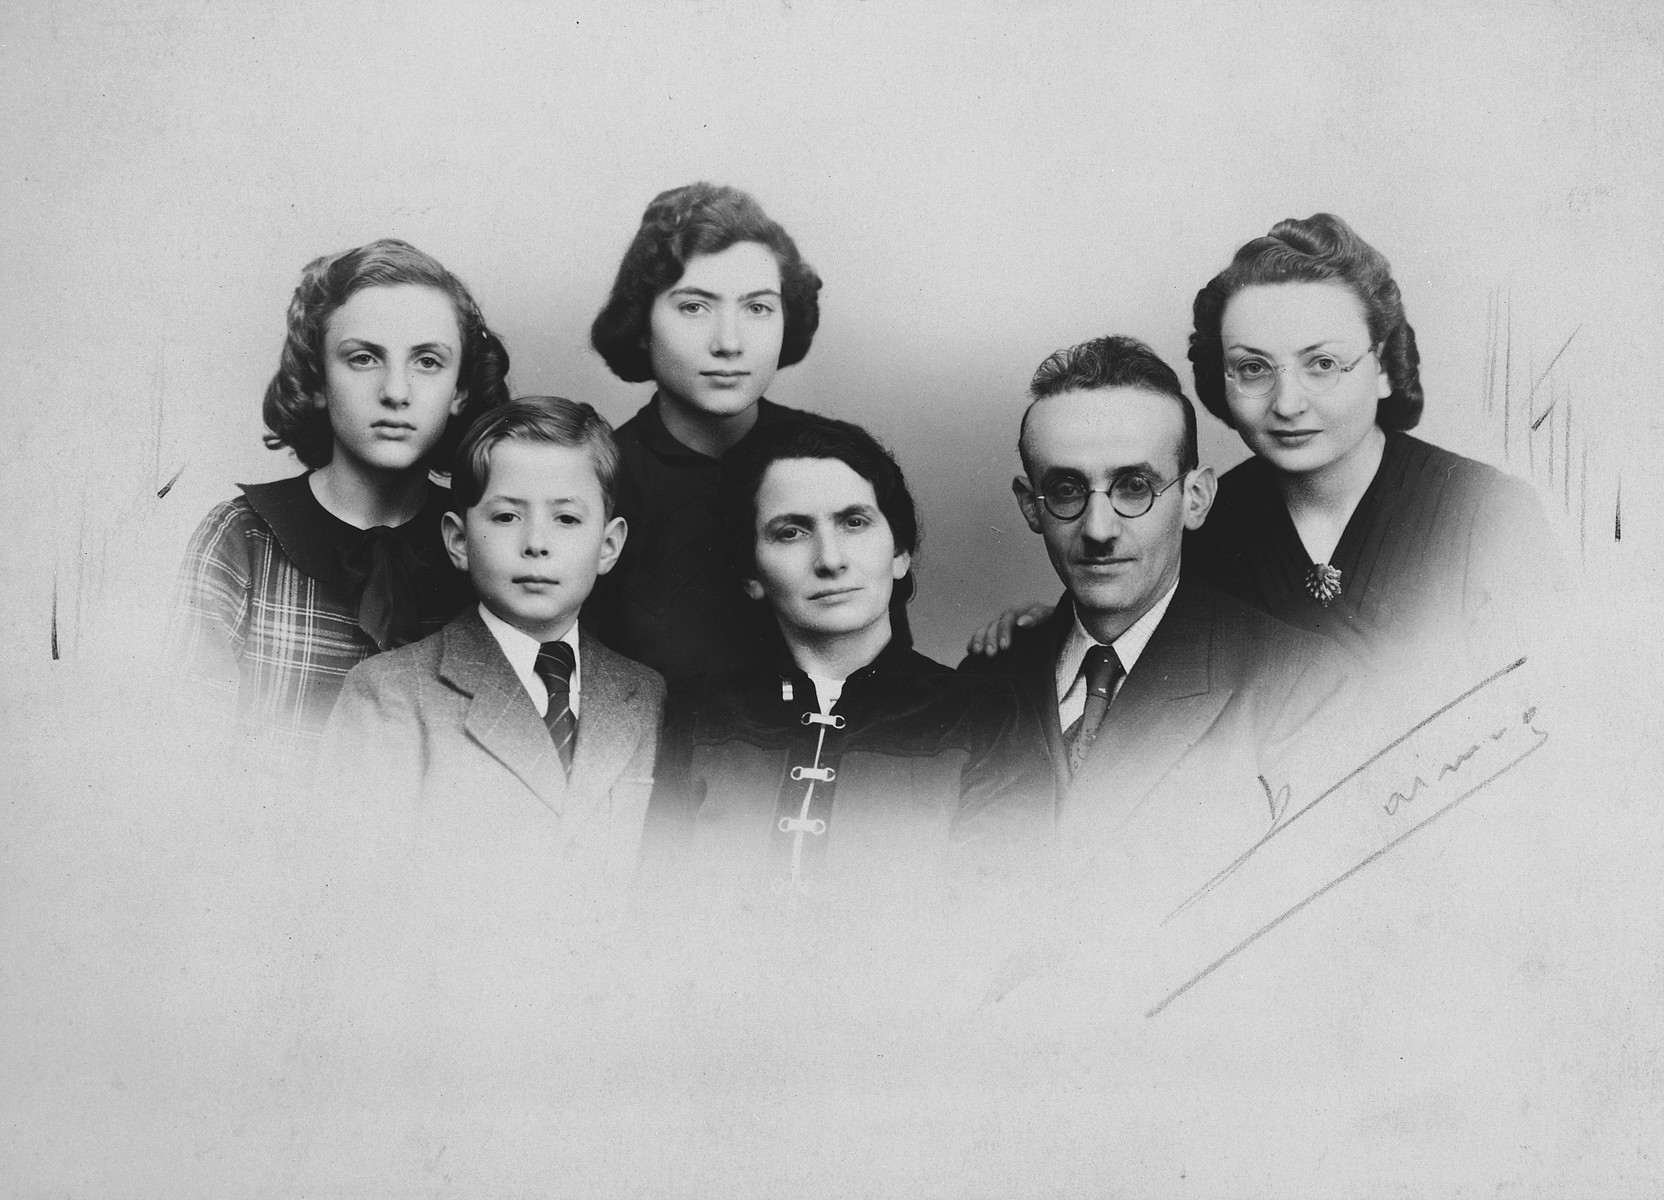 Wartime portrait of a French-Jewish family.

From left to right are Suzanne, Henri, Rosette, Gittle, Shimon and Sarah Rivka Bomblat.